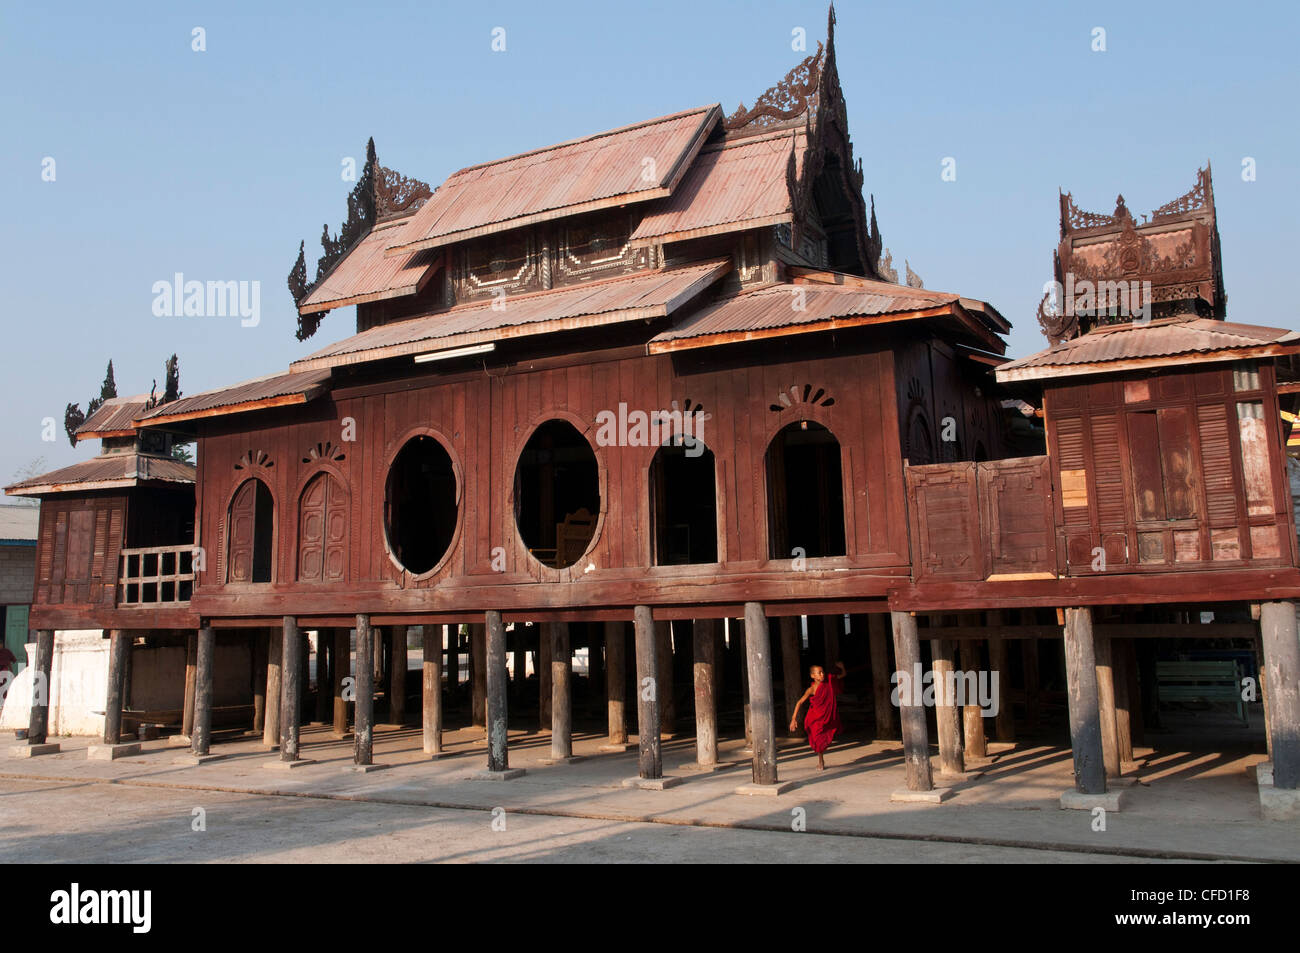 Venerable wooden Thein (consecration hall) with unique oval windows, Nyaungshwe, Shan State, Myanmar, Asia Stock Photo